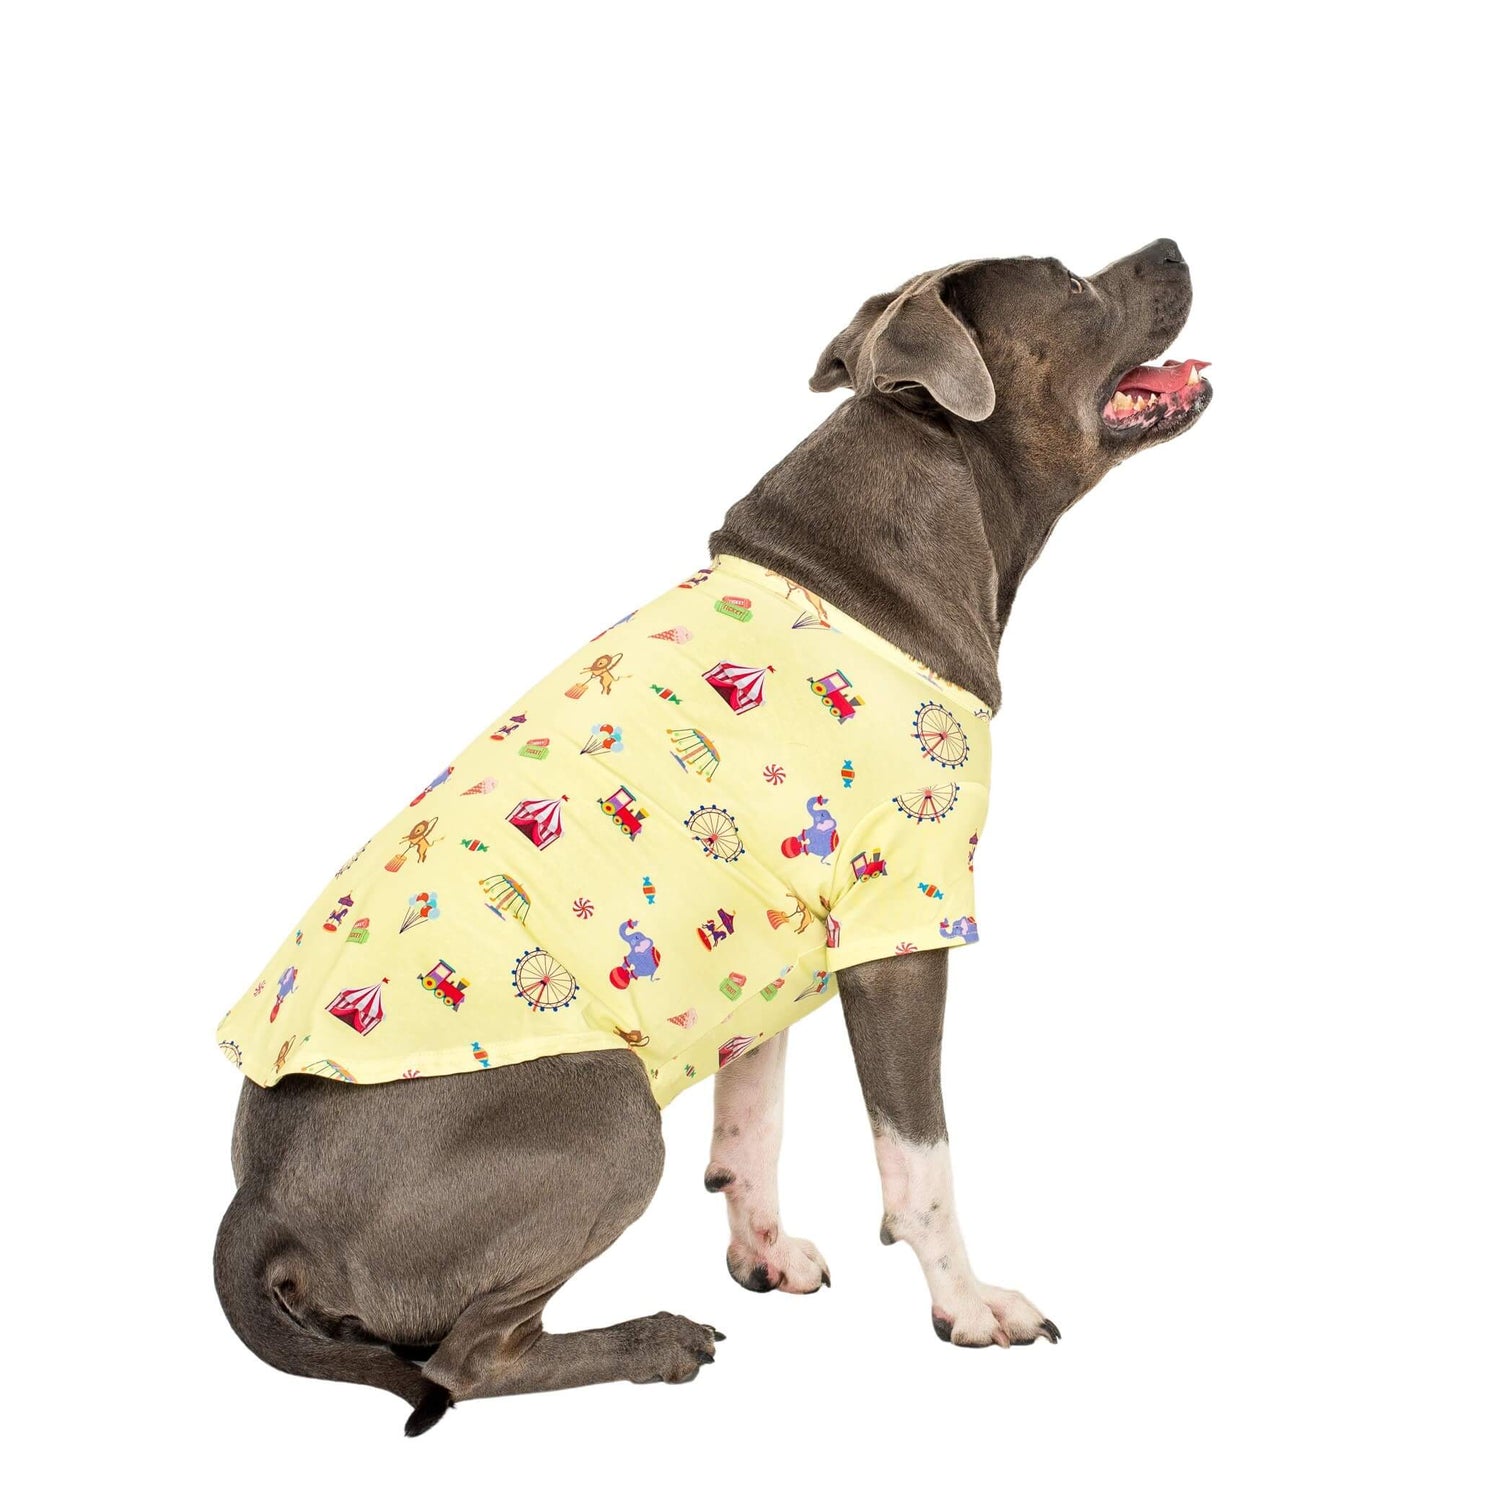 An American Staffy wearing Vibrant Hound Admit one dog shirt. The dog shirt is carnival themed.